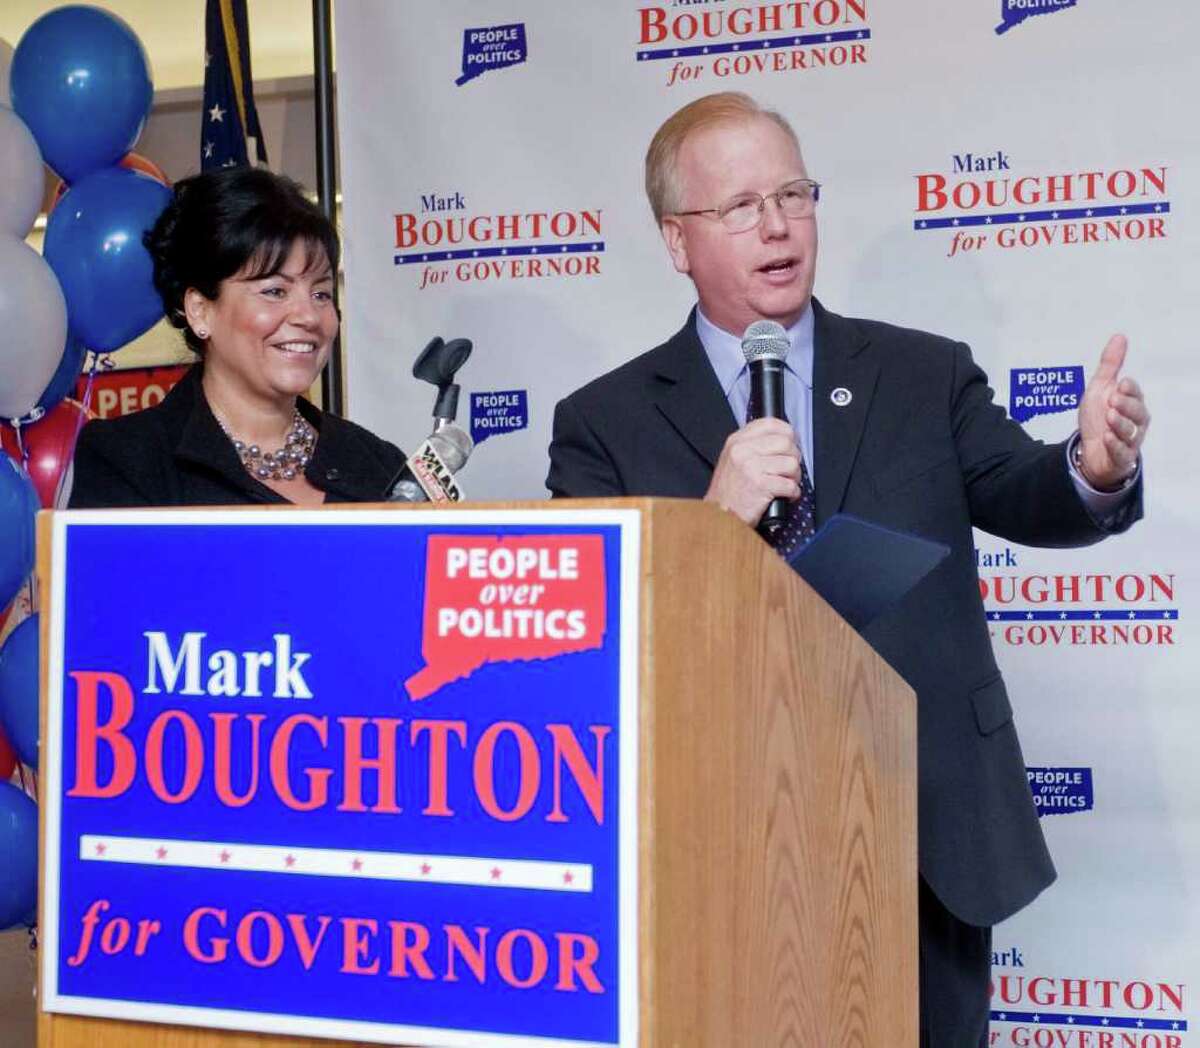 Phyllis Boughton and Mayor Mark Boughton make the announcement to run for governor, at Stony Hill Inn in Bethel. Monday, Feb. 1, 2010